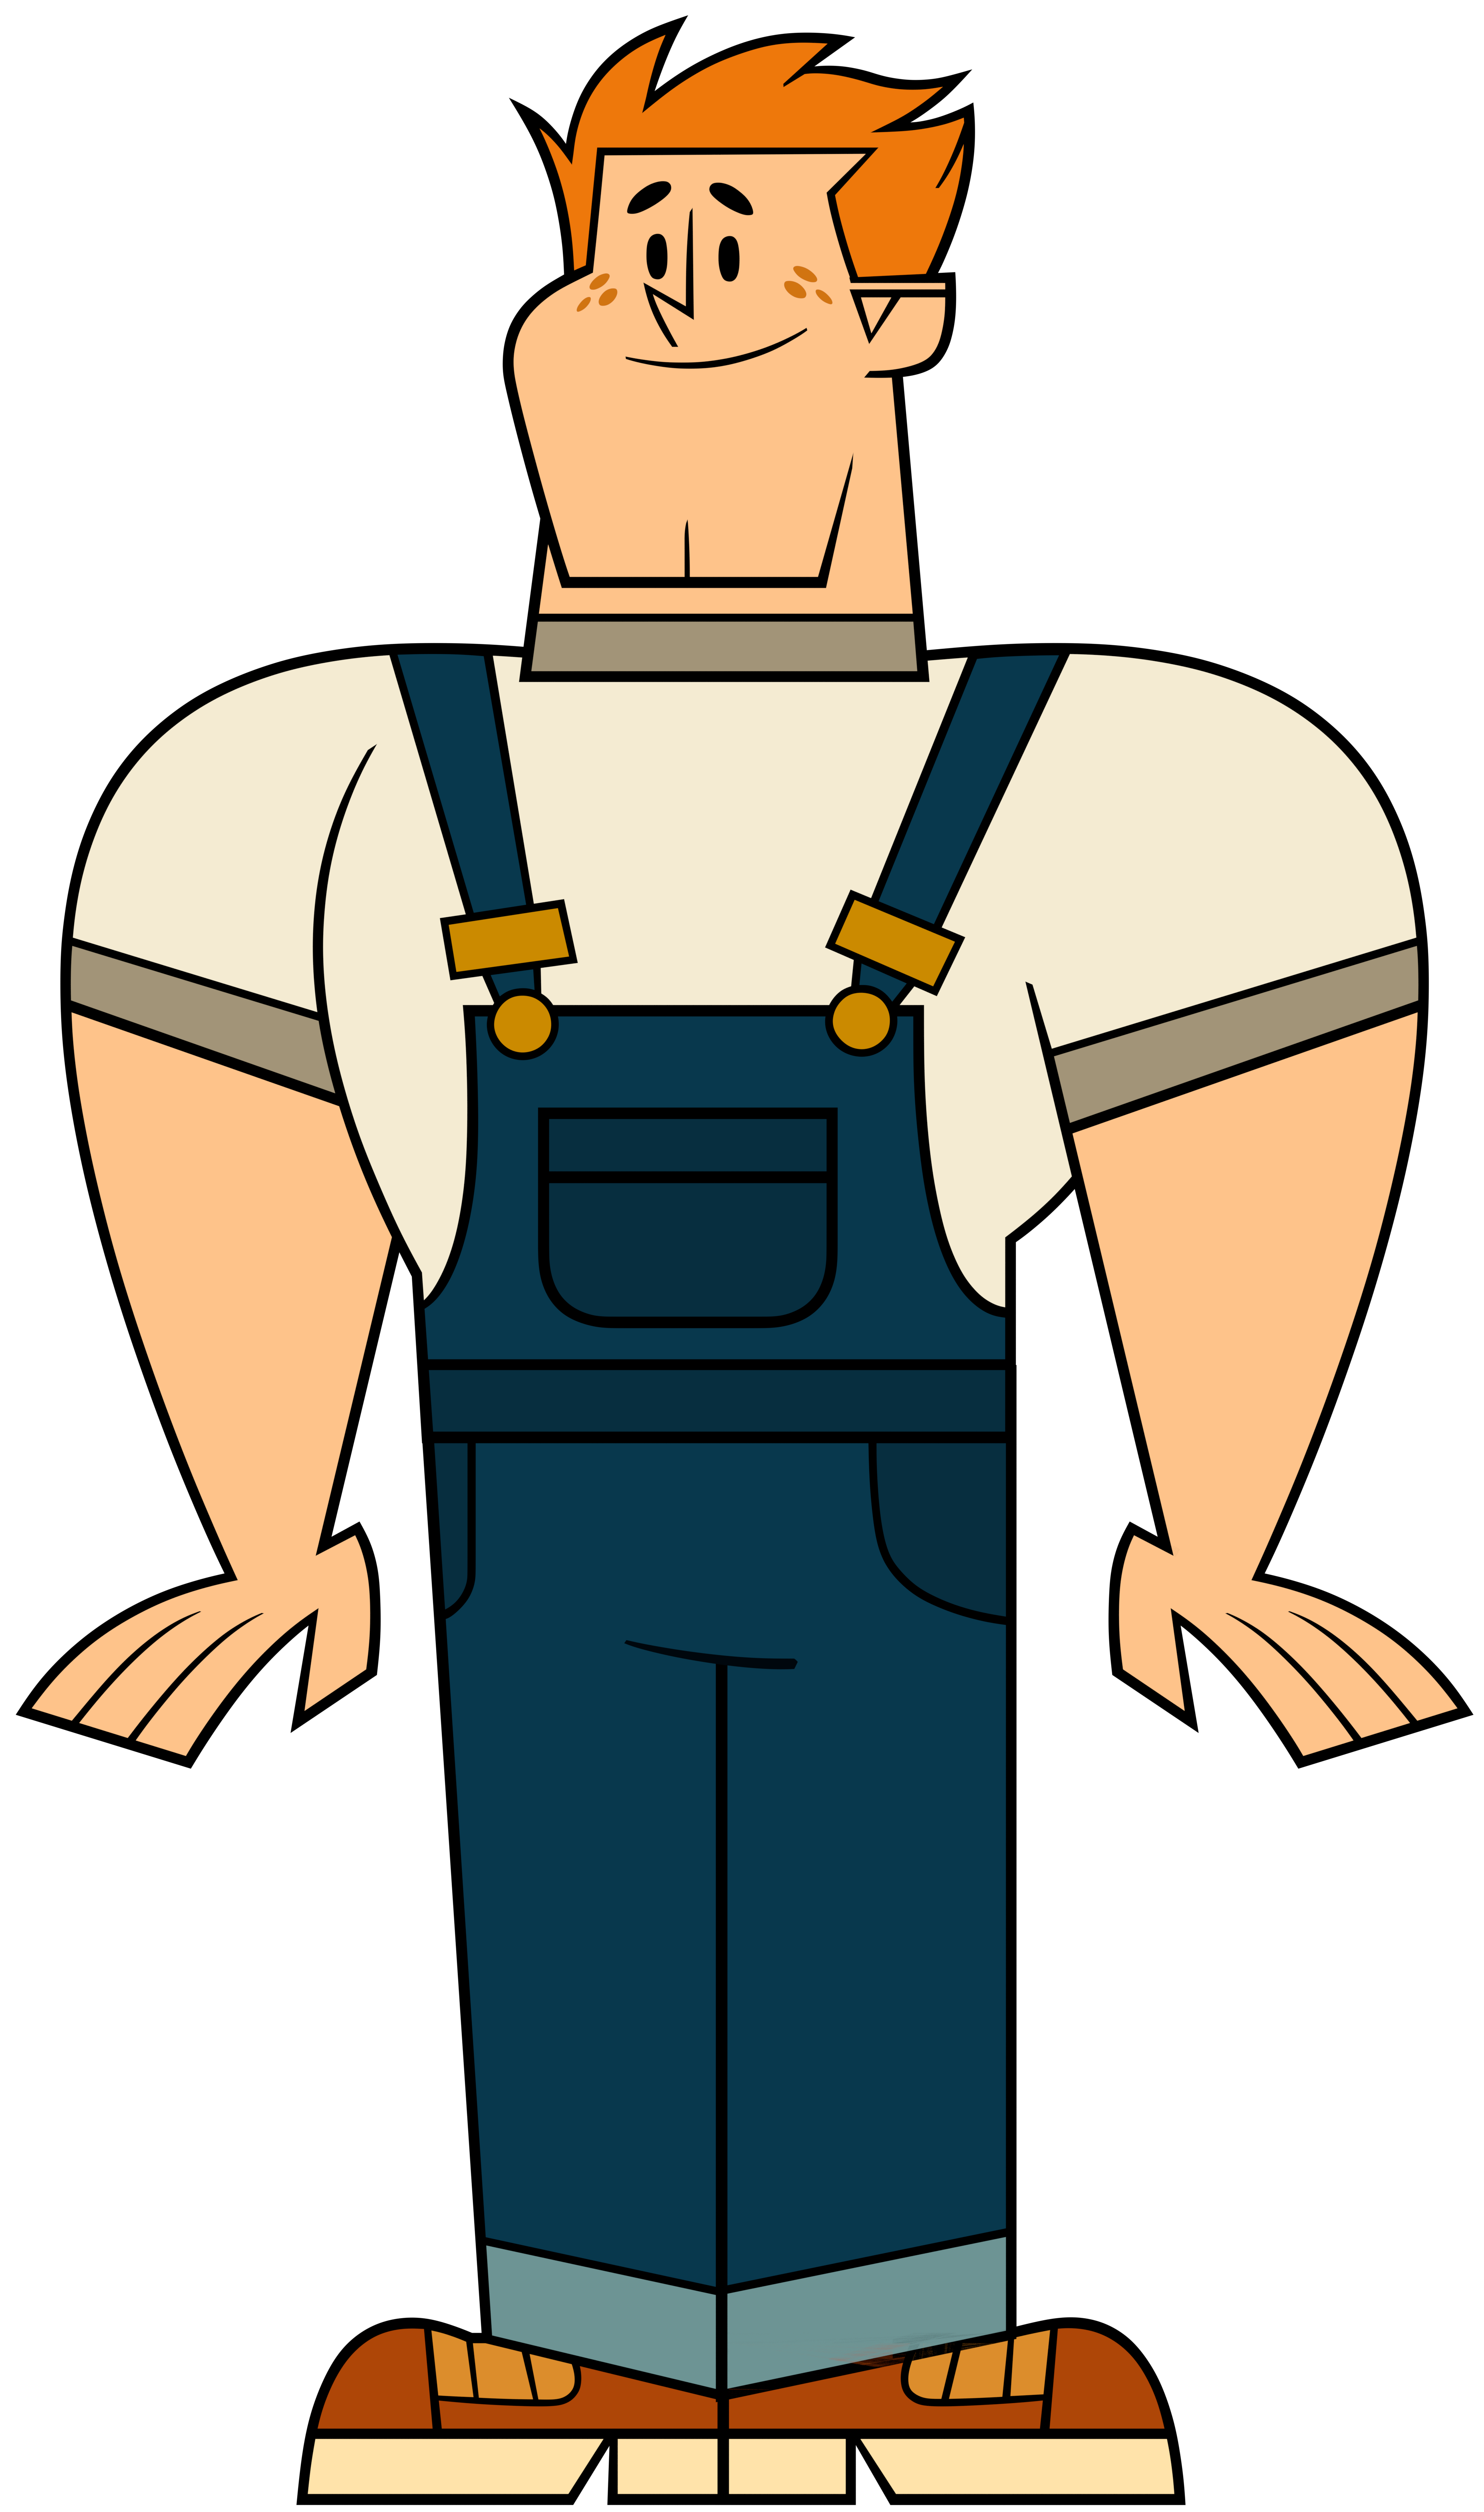 Central Total Drama